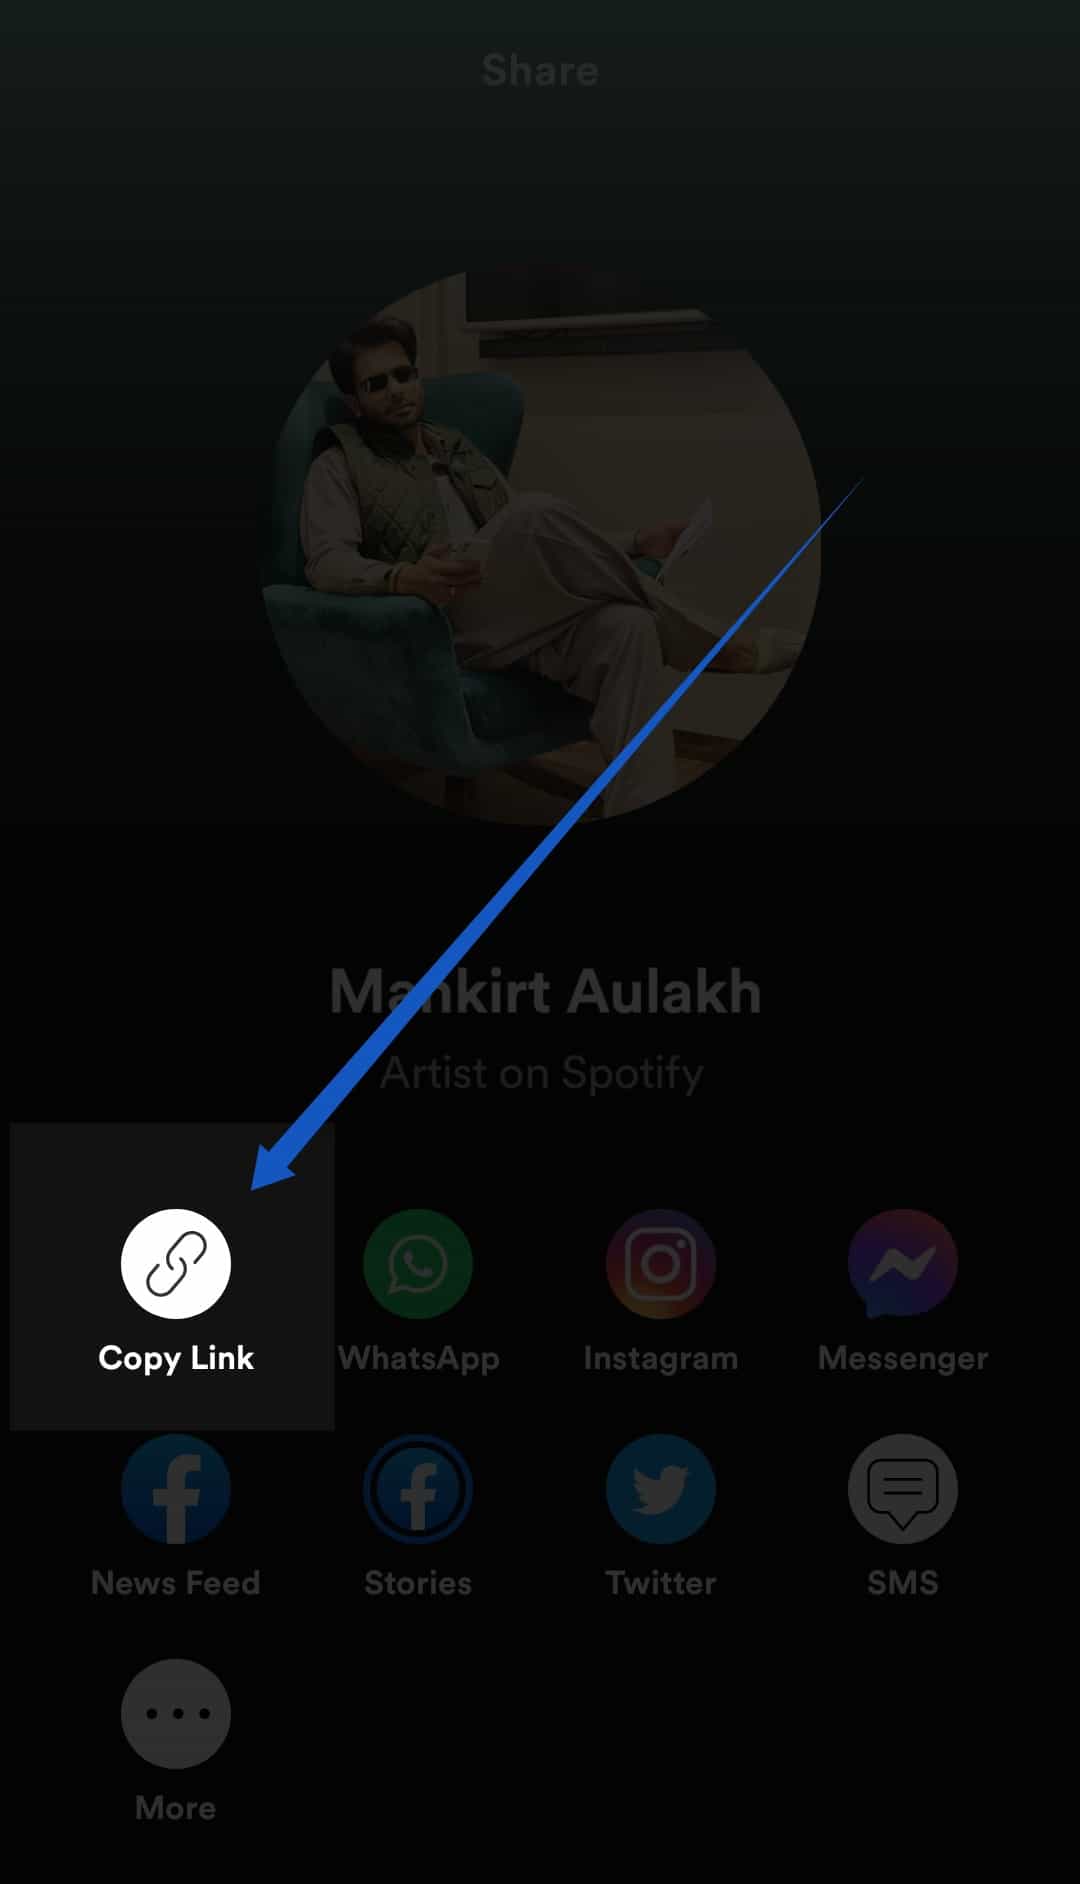 You may now copy the link and paste it into the Spotify search box - Is It Possible to Follow Someone's Spotify Collection Secretly